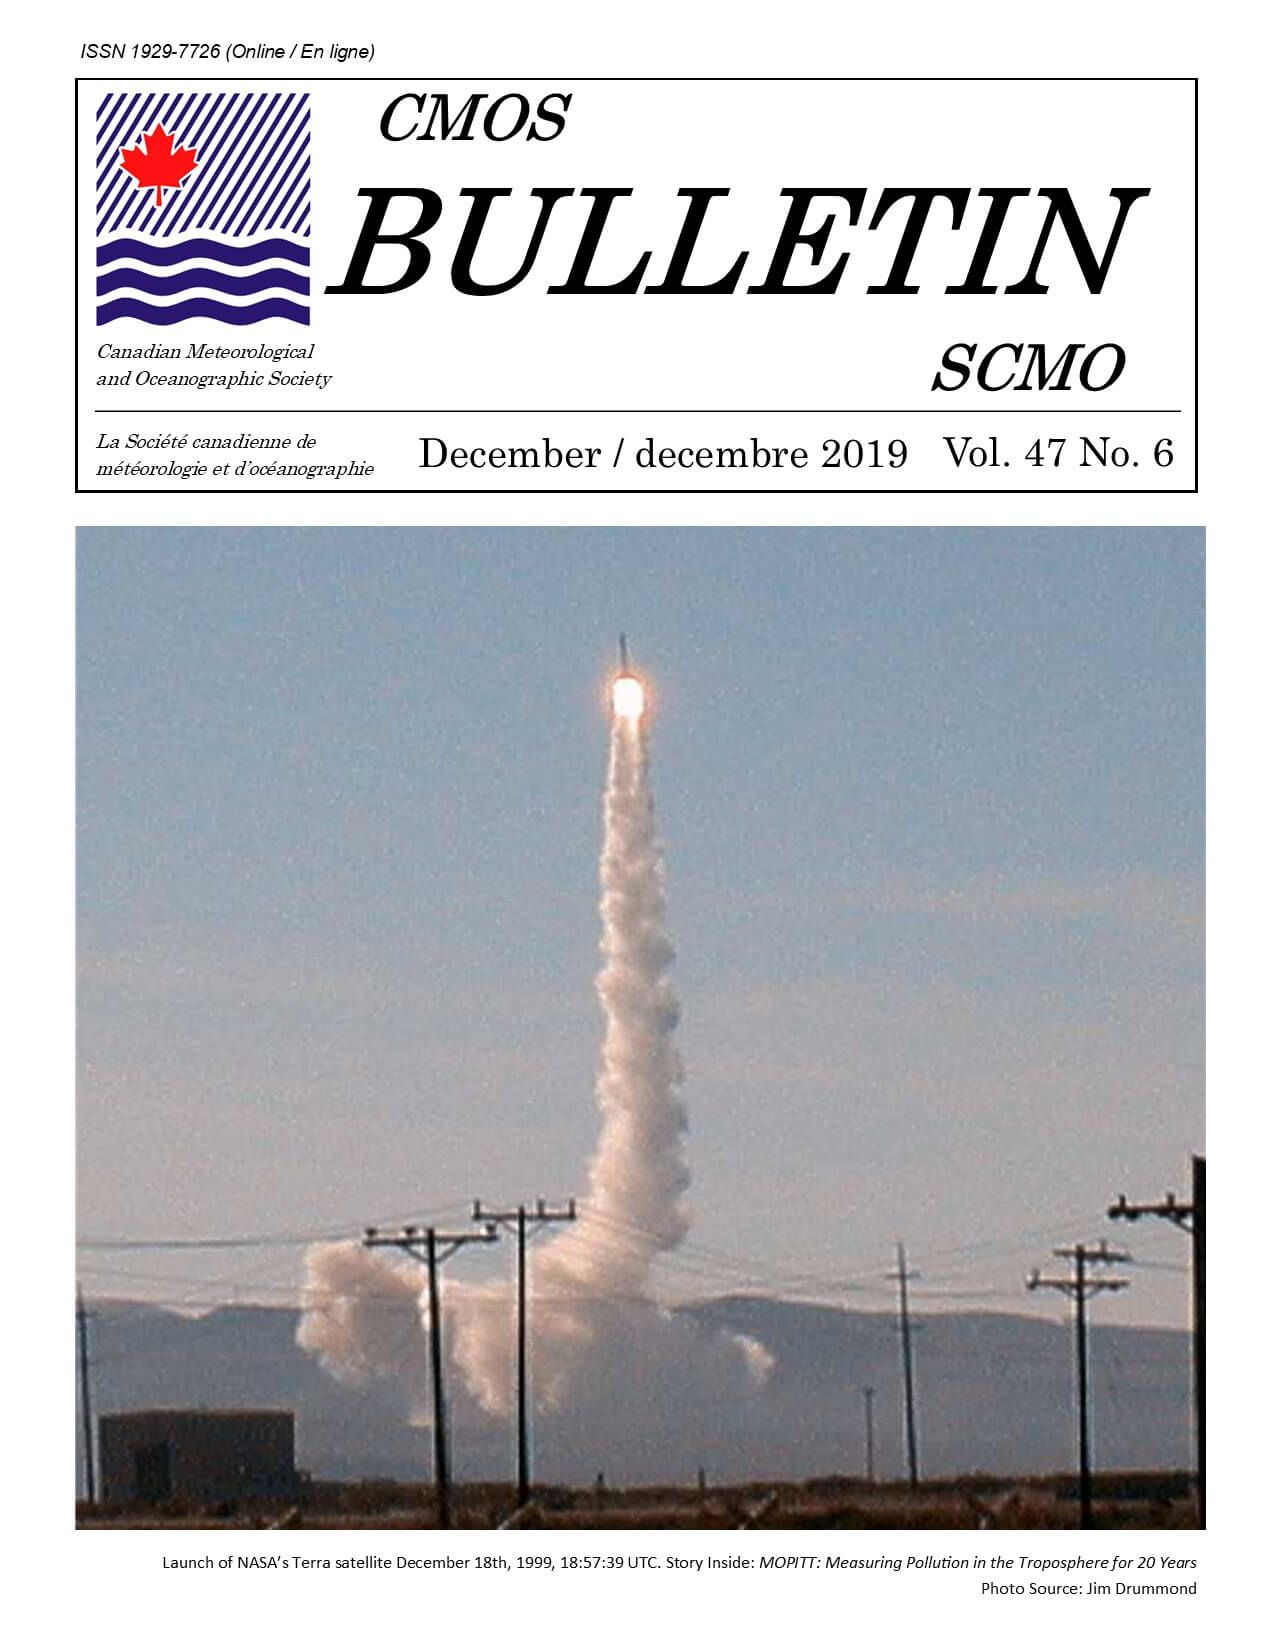 Cover of CMOS Bulletin Vol.47 No.6 shows the MOPITT Instrument onboard the Terra Satellite launching in to space